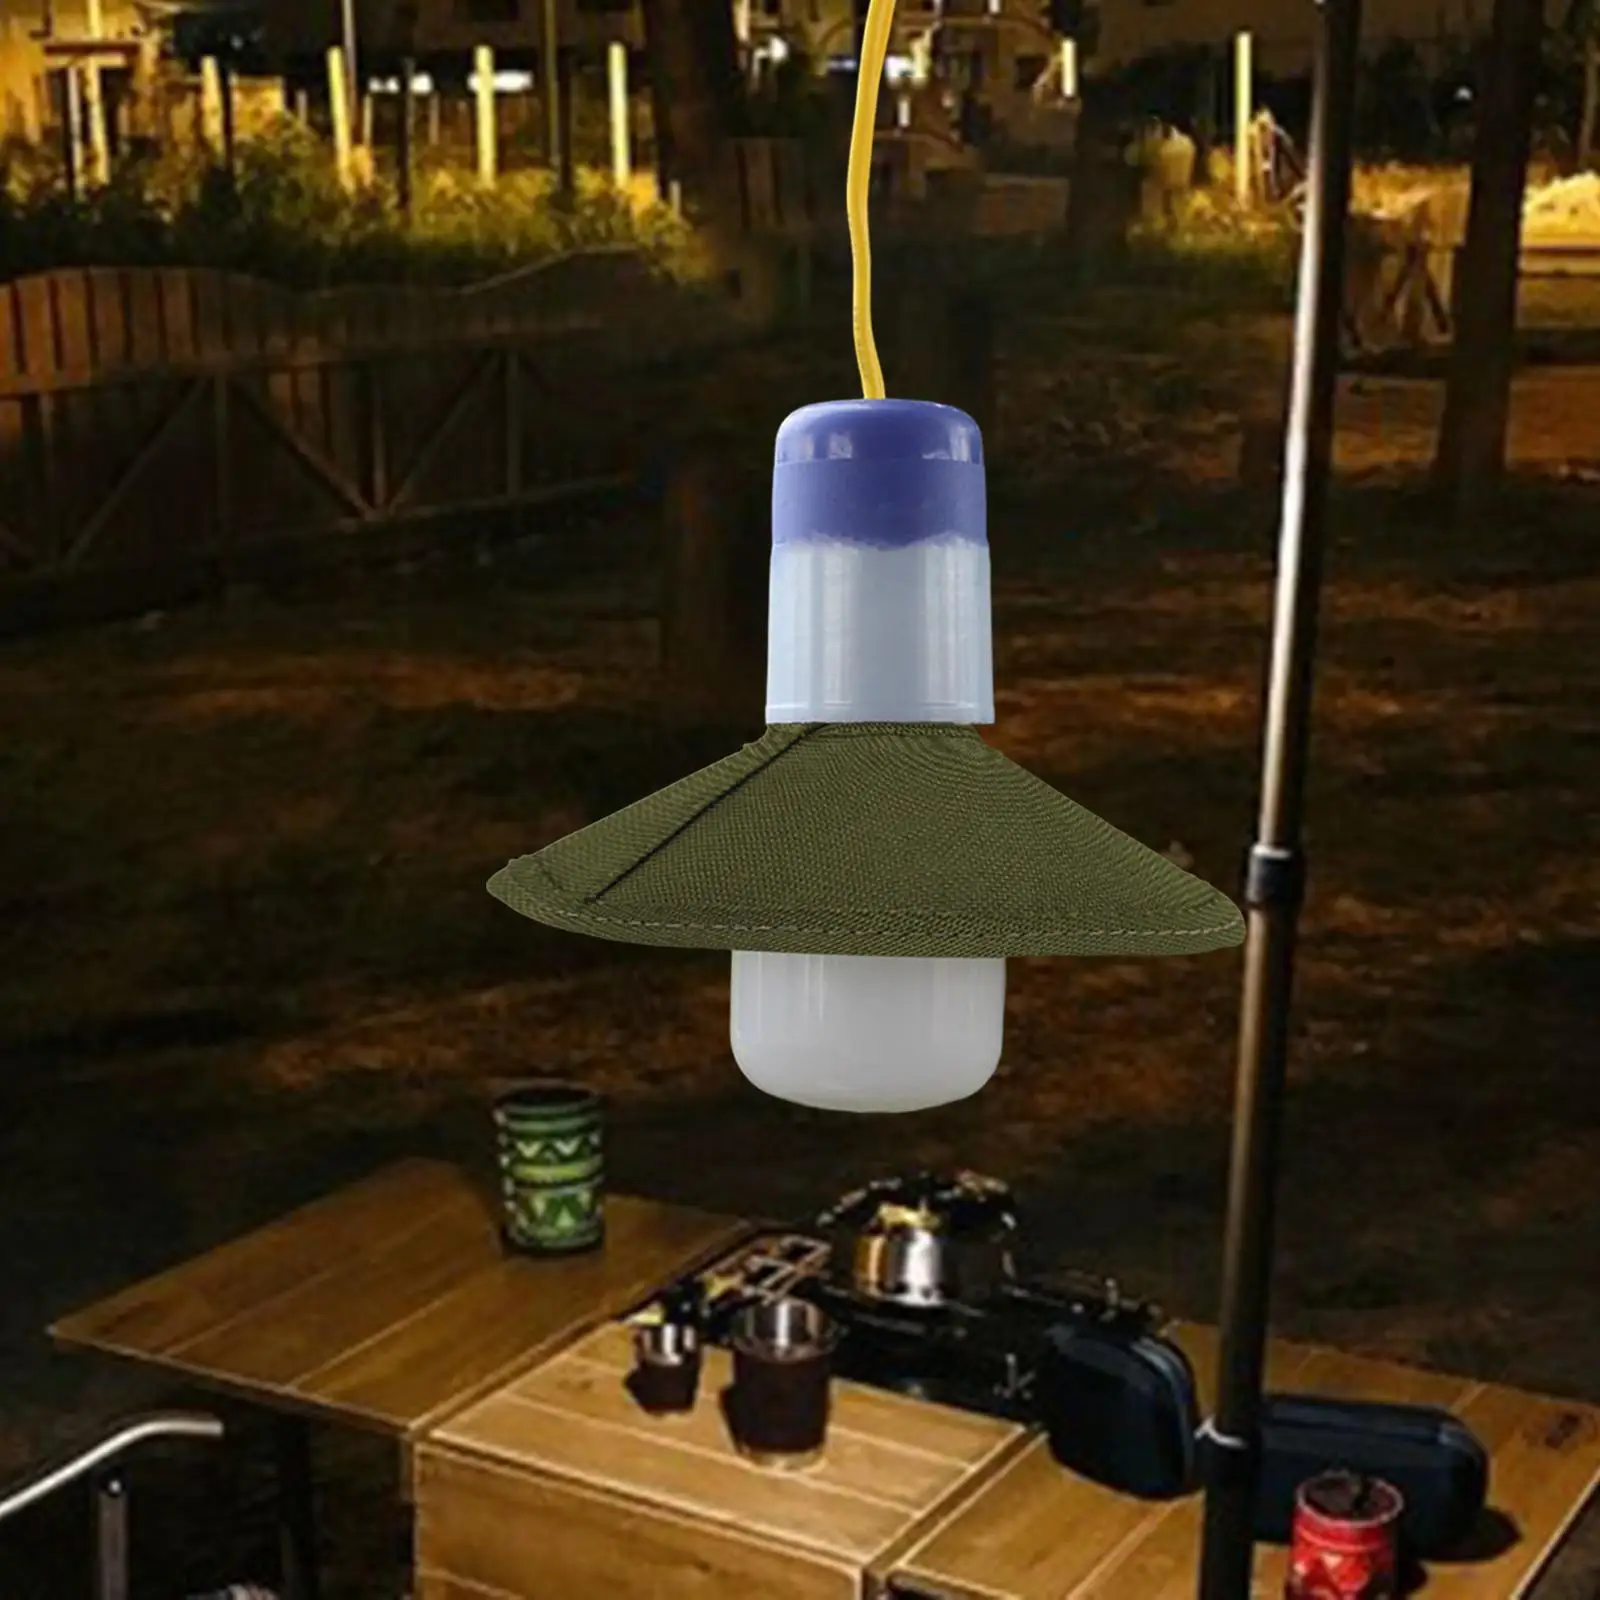 1x Lamp Shade Canvas Decoration Lamp Cover Dustproof Protective Removable Replacement for Dining Room Camping Home Cafe